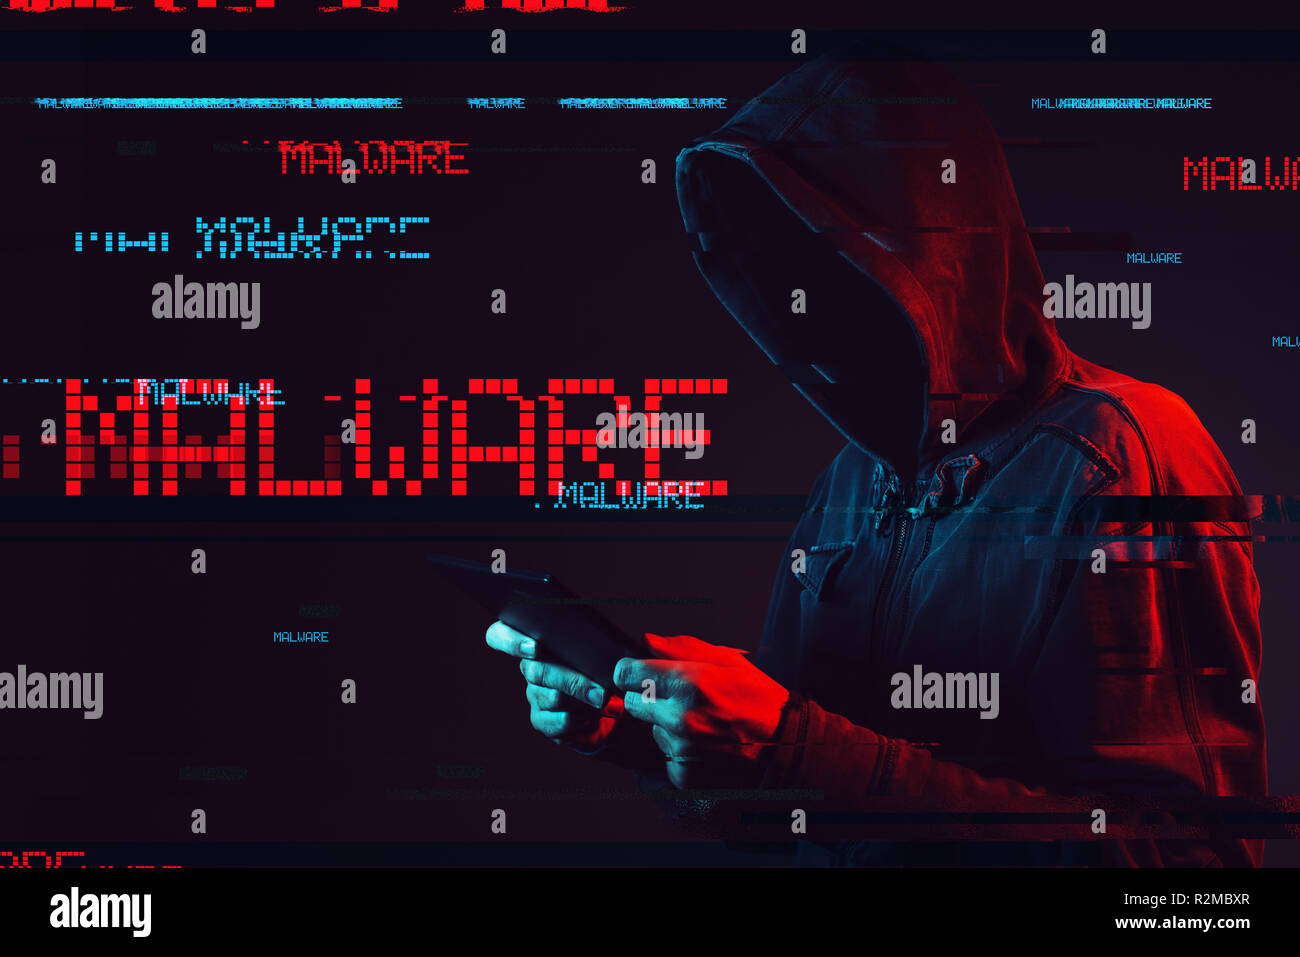 Malware concept with faceless hooded male person using tablet computer, low key red and blue lit image and digital glitch effect Stock Photo